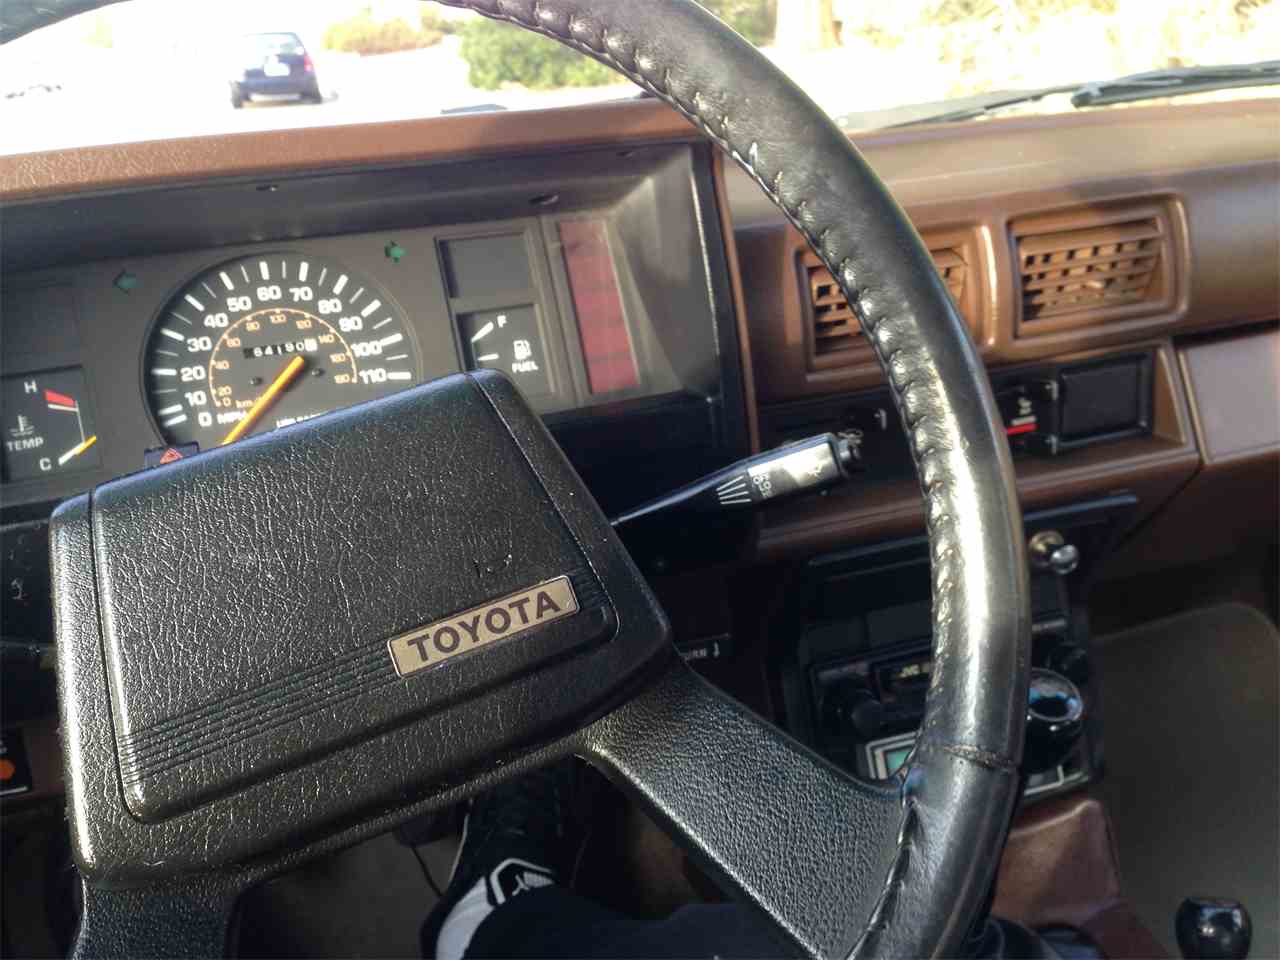 4Runner, Why does this ’85 4Runner look so different?, ClassicCars.com Journal